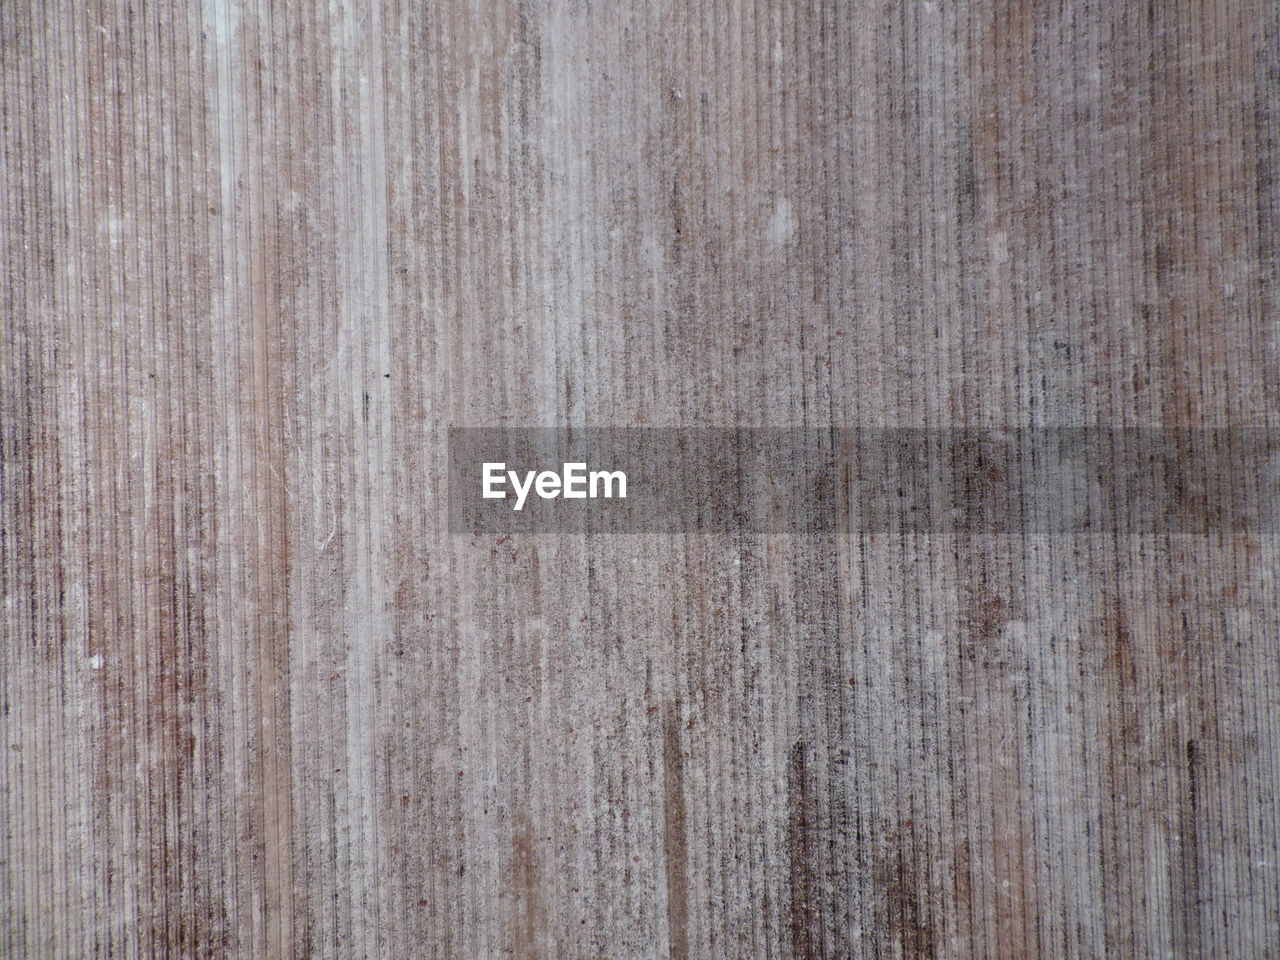 FULL FRAME SHOT OF WEATHERED WOODEN WOOD